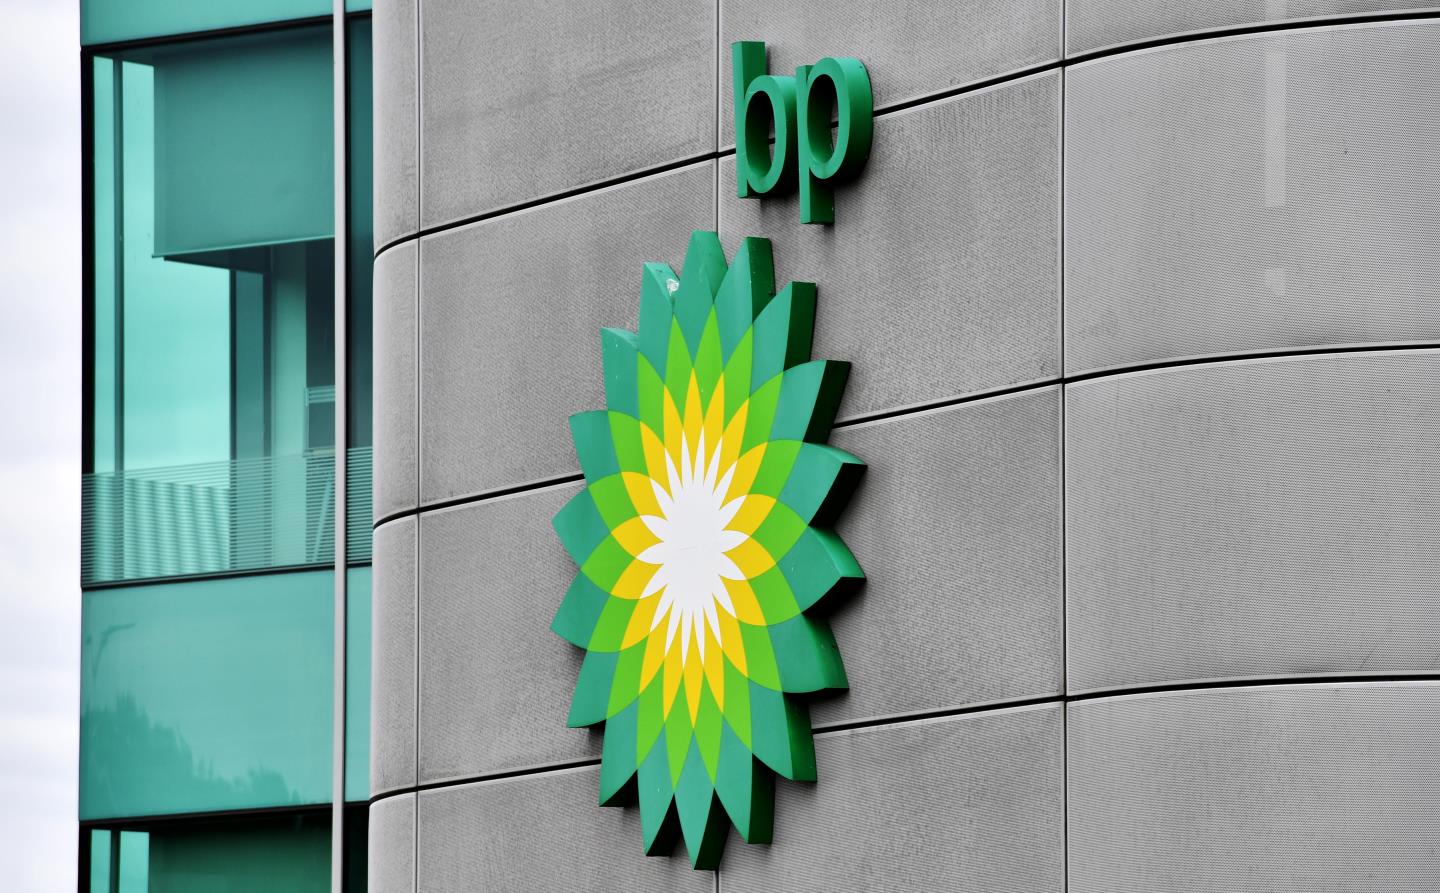 BP reportedly pressing pause on offshore wind amid investor discontent